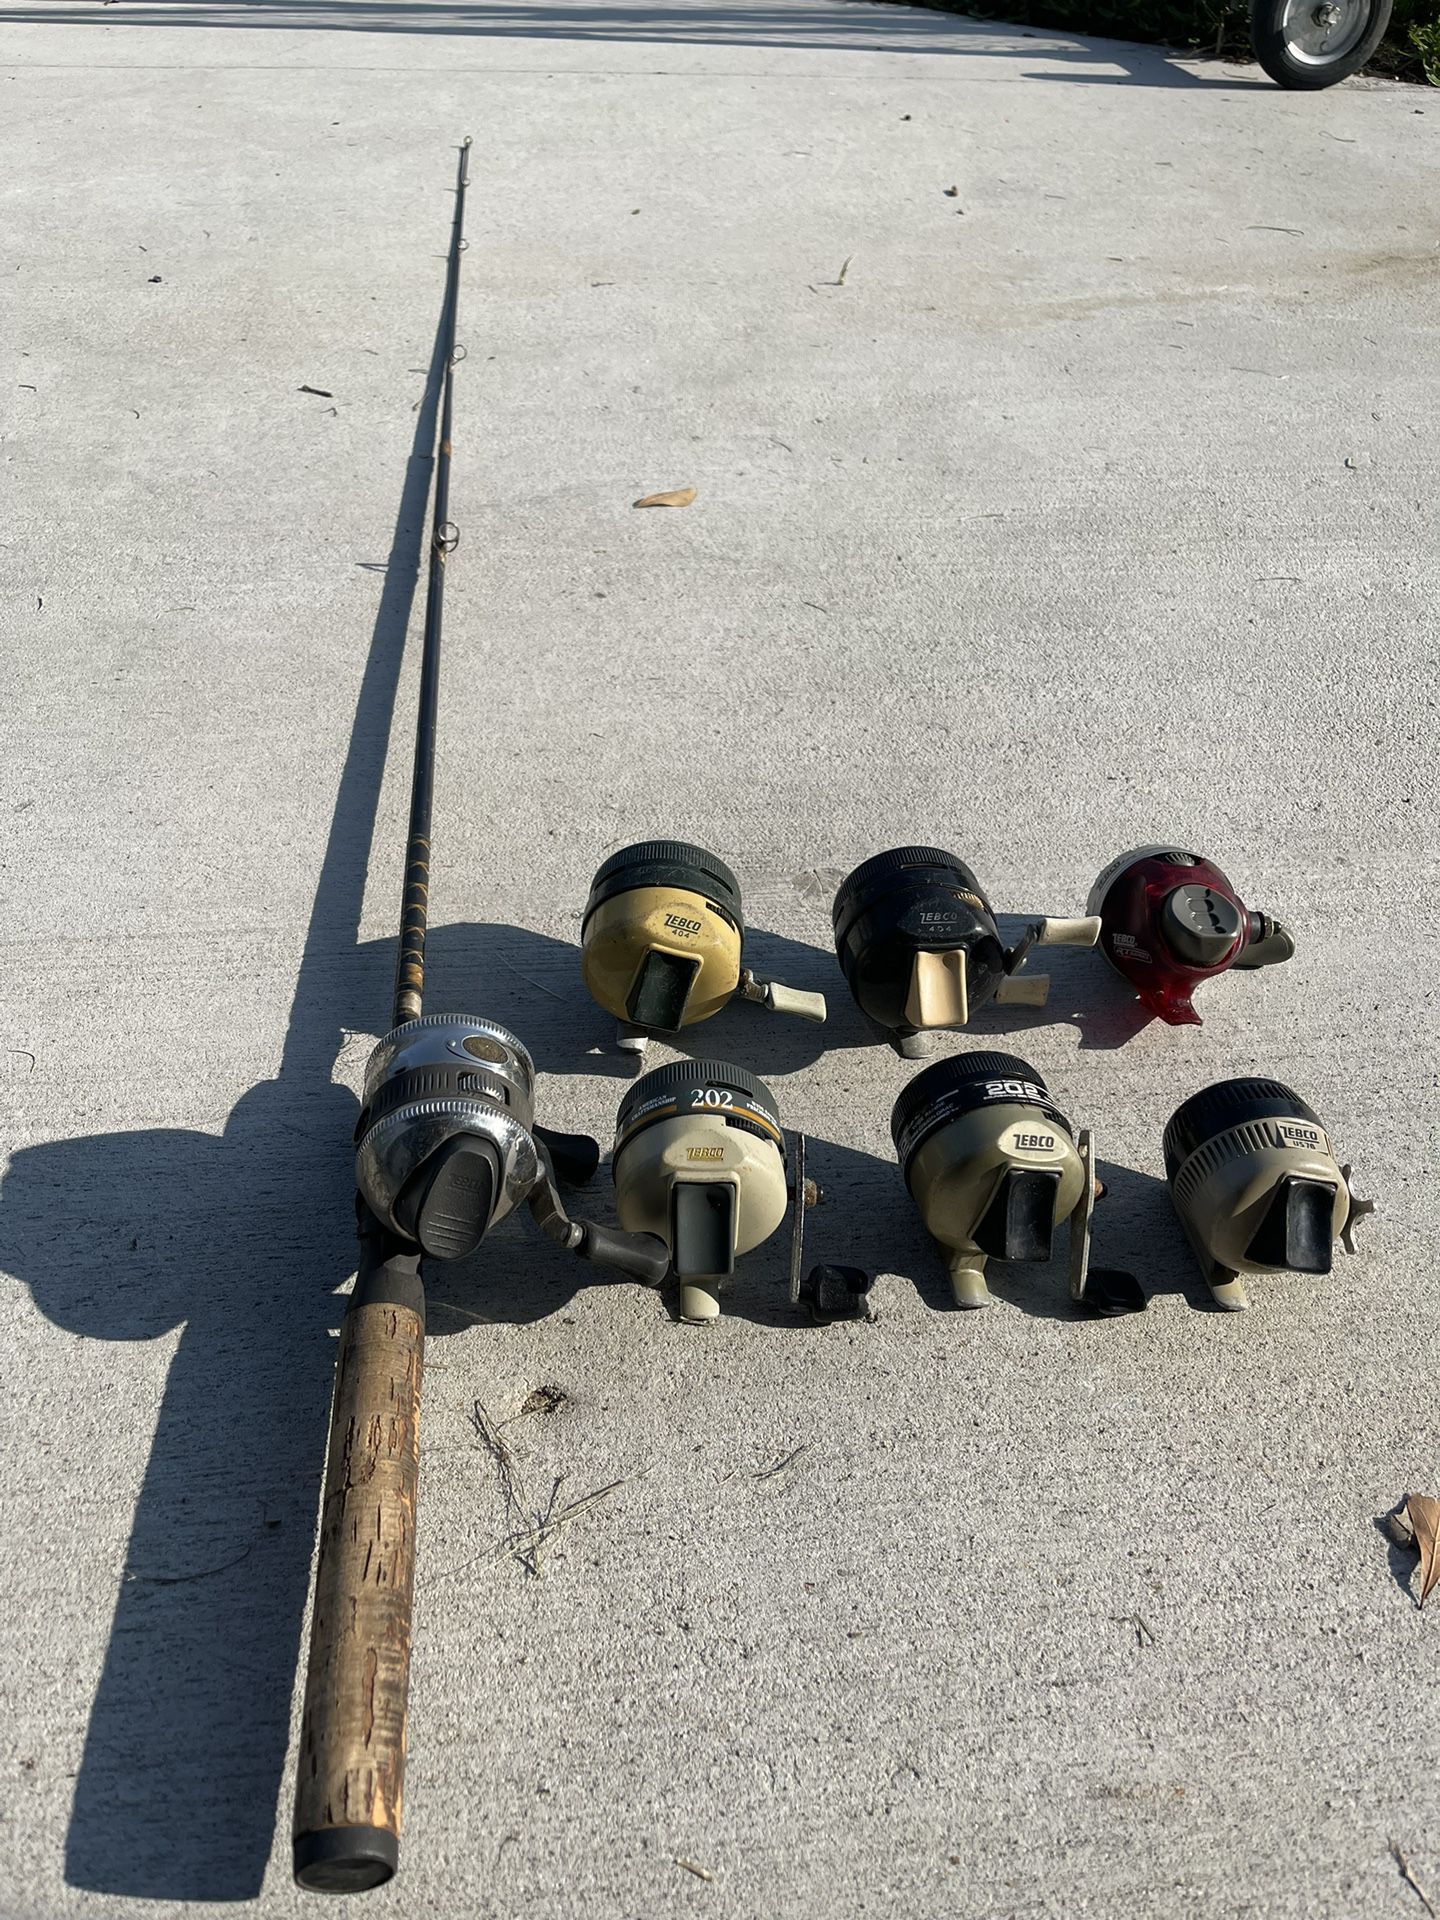 Lot Of 6 Zebco Reels And A Zebco Rod/reel Combo. # 32